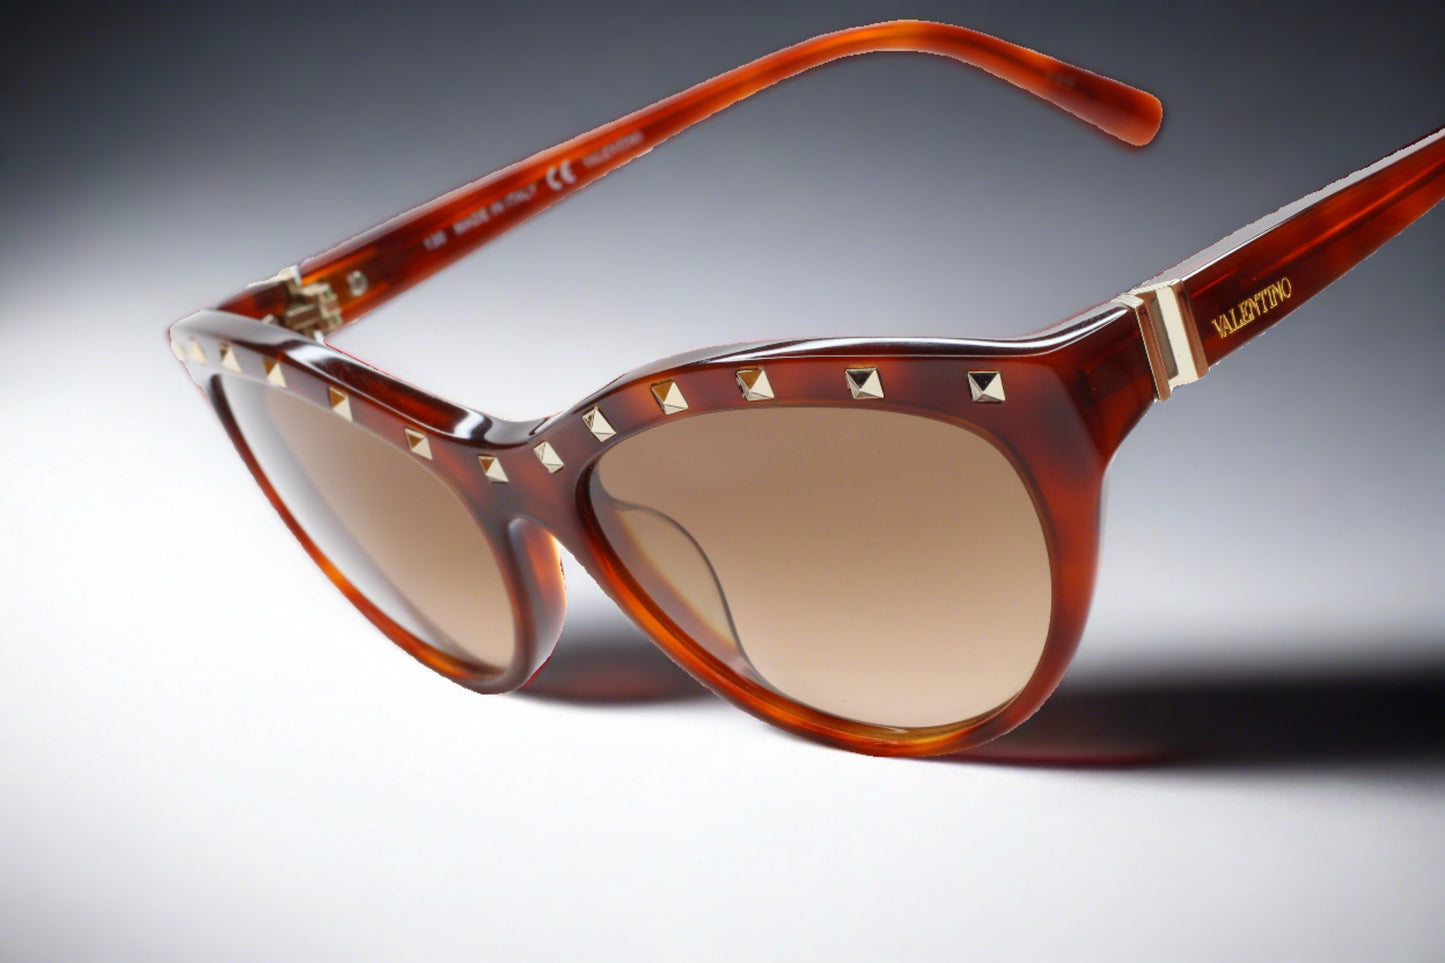 Valentino V641S Brown Designer Silver Studded Acetate Italy Luxury Sunglasses - ABC Optical